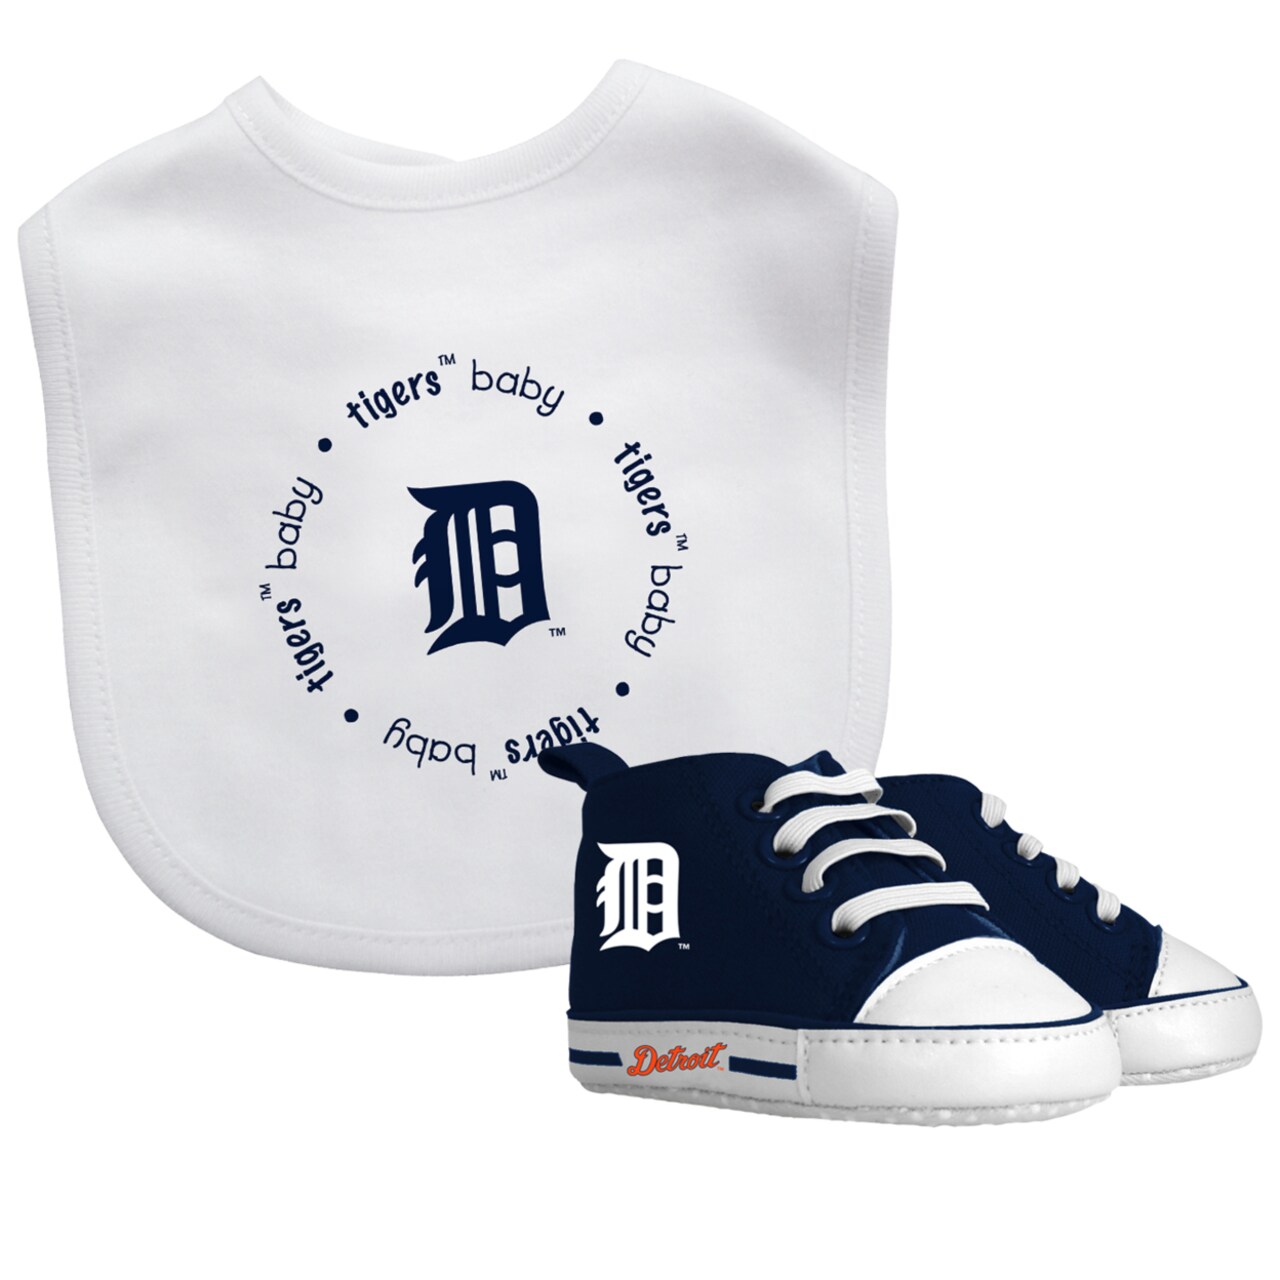 Baby Fanatic   2 Piece Bid and Shoes - MLB Detroit Tigers - White Unisex Infant Apparel